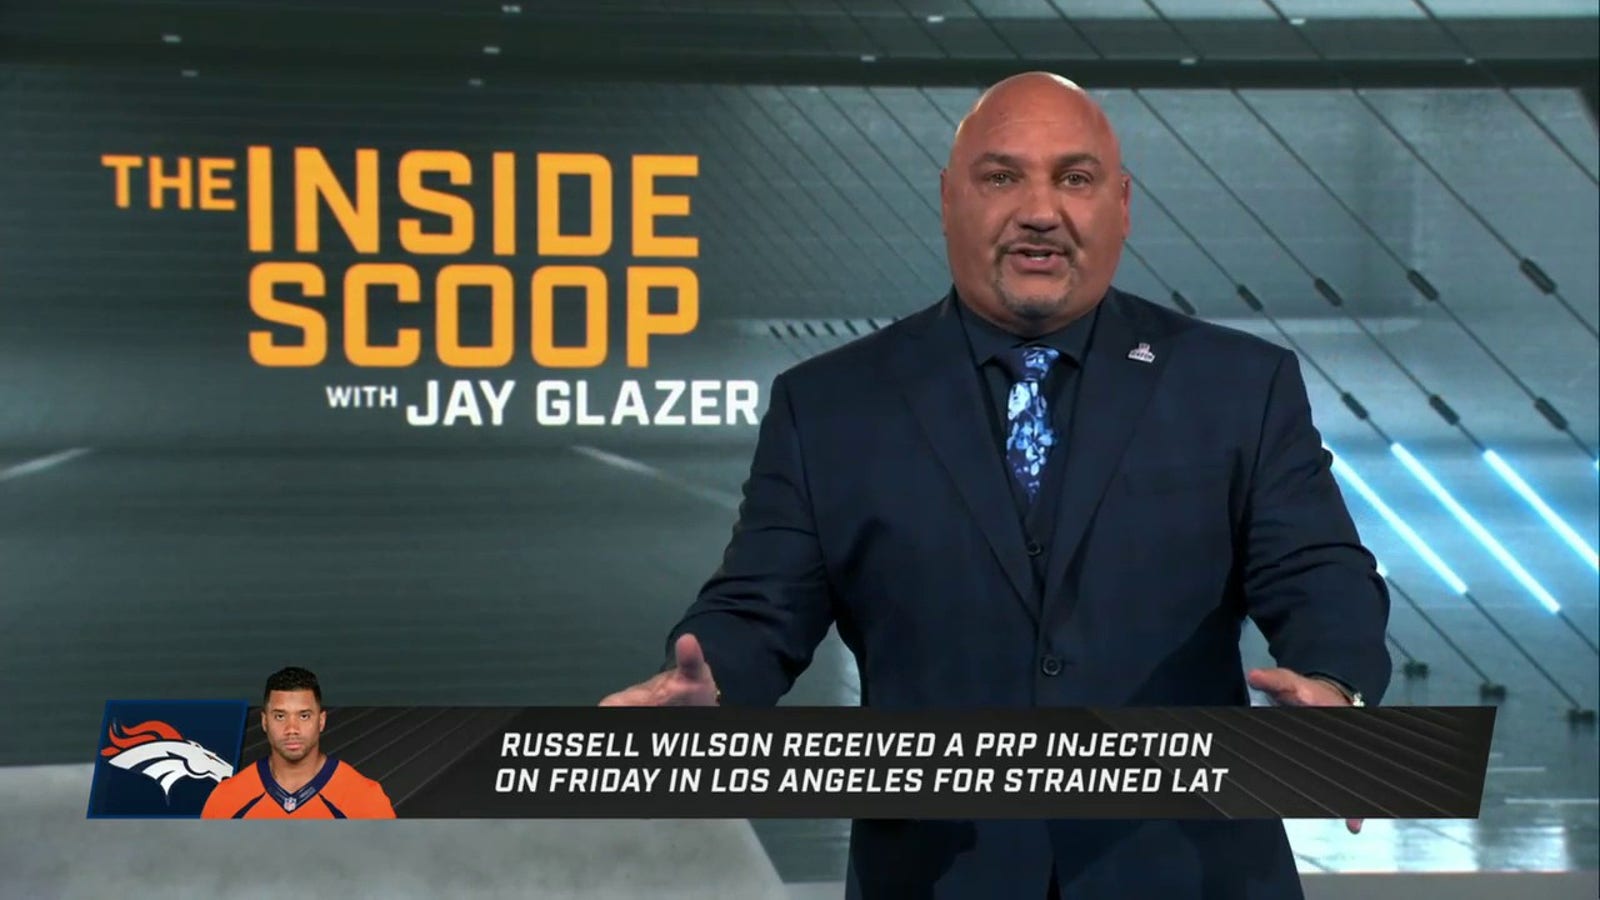 Jay Glazer updates us on the Steelers' faith in Kenny Pickett and other topics